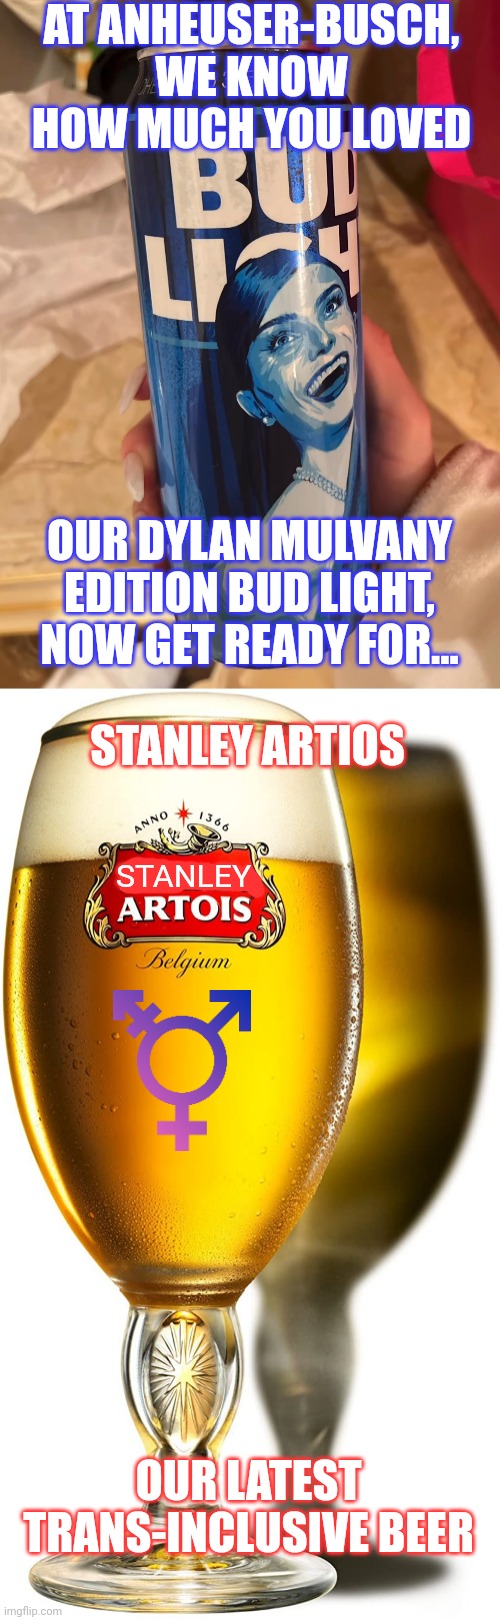 AnheuserBusch also makes Stella Artois so after their ad campaign with